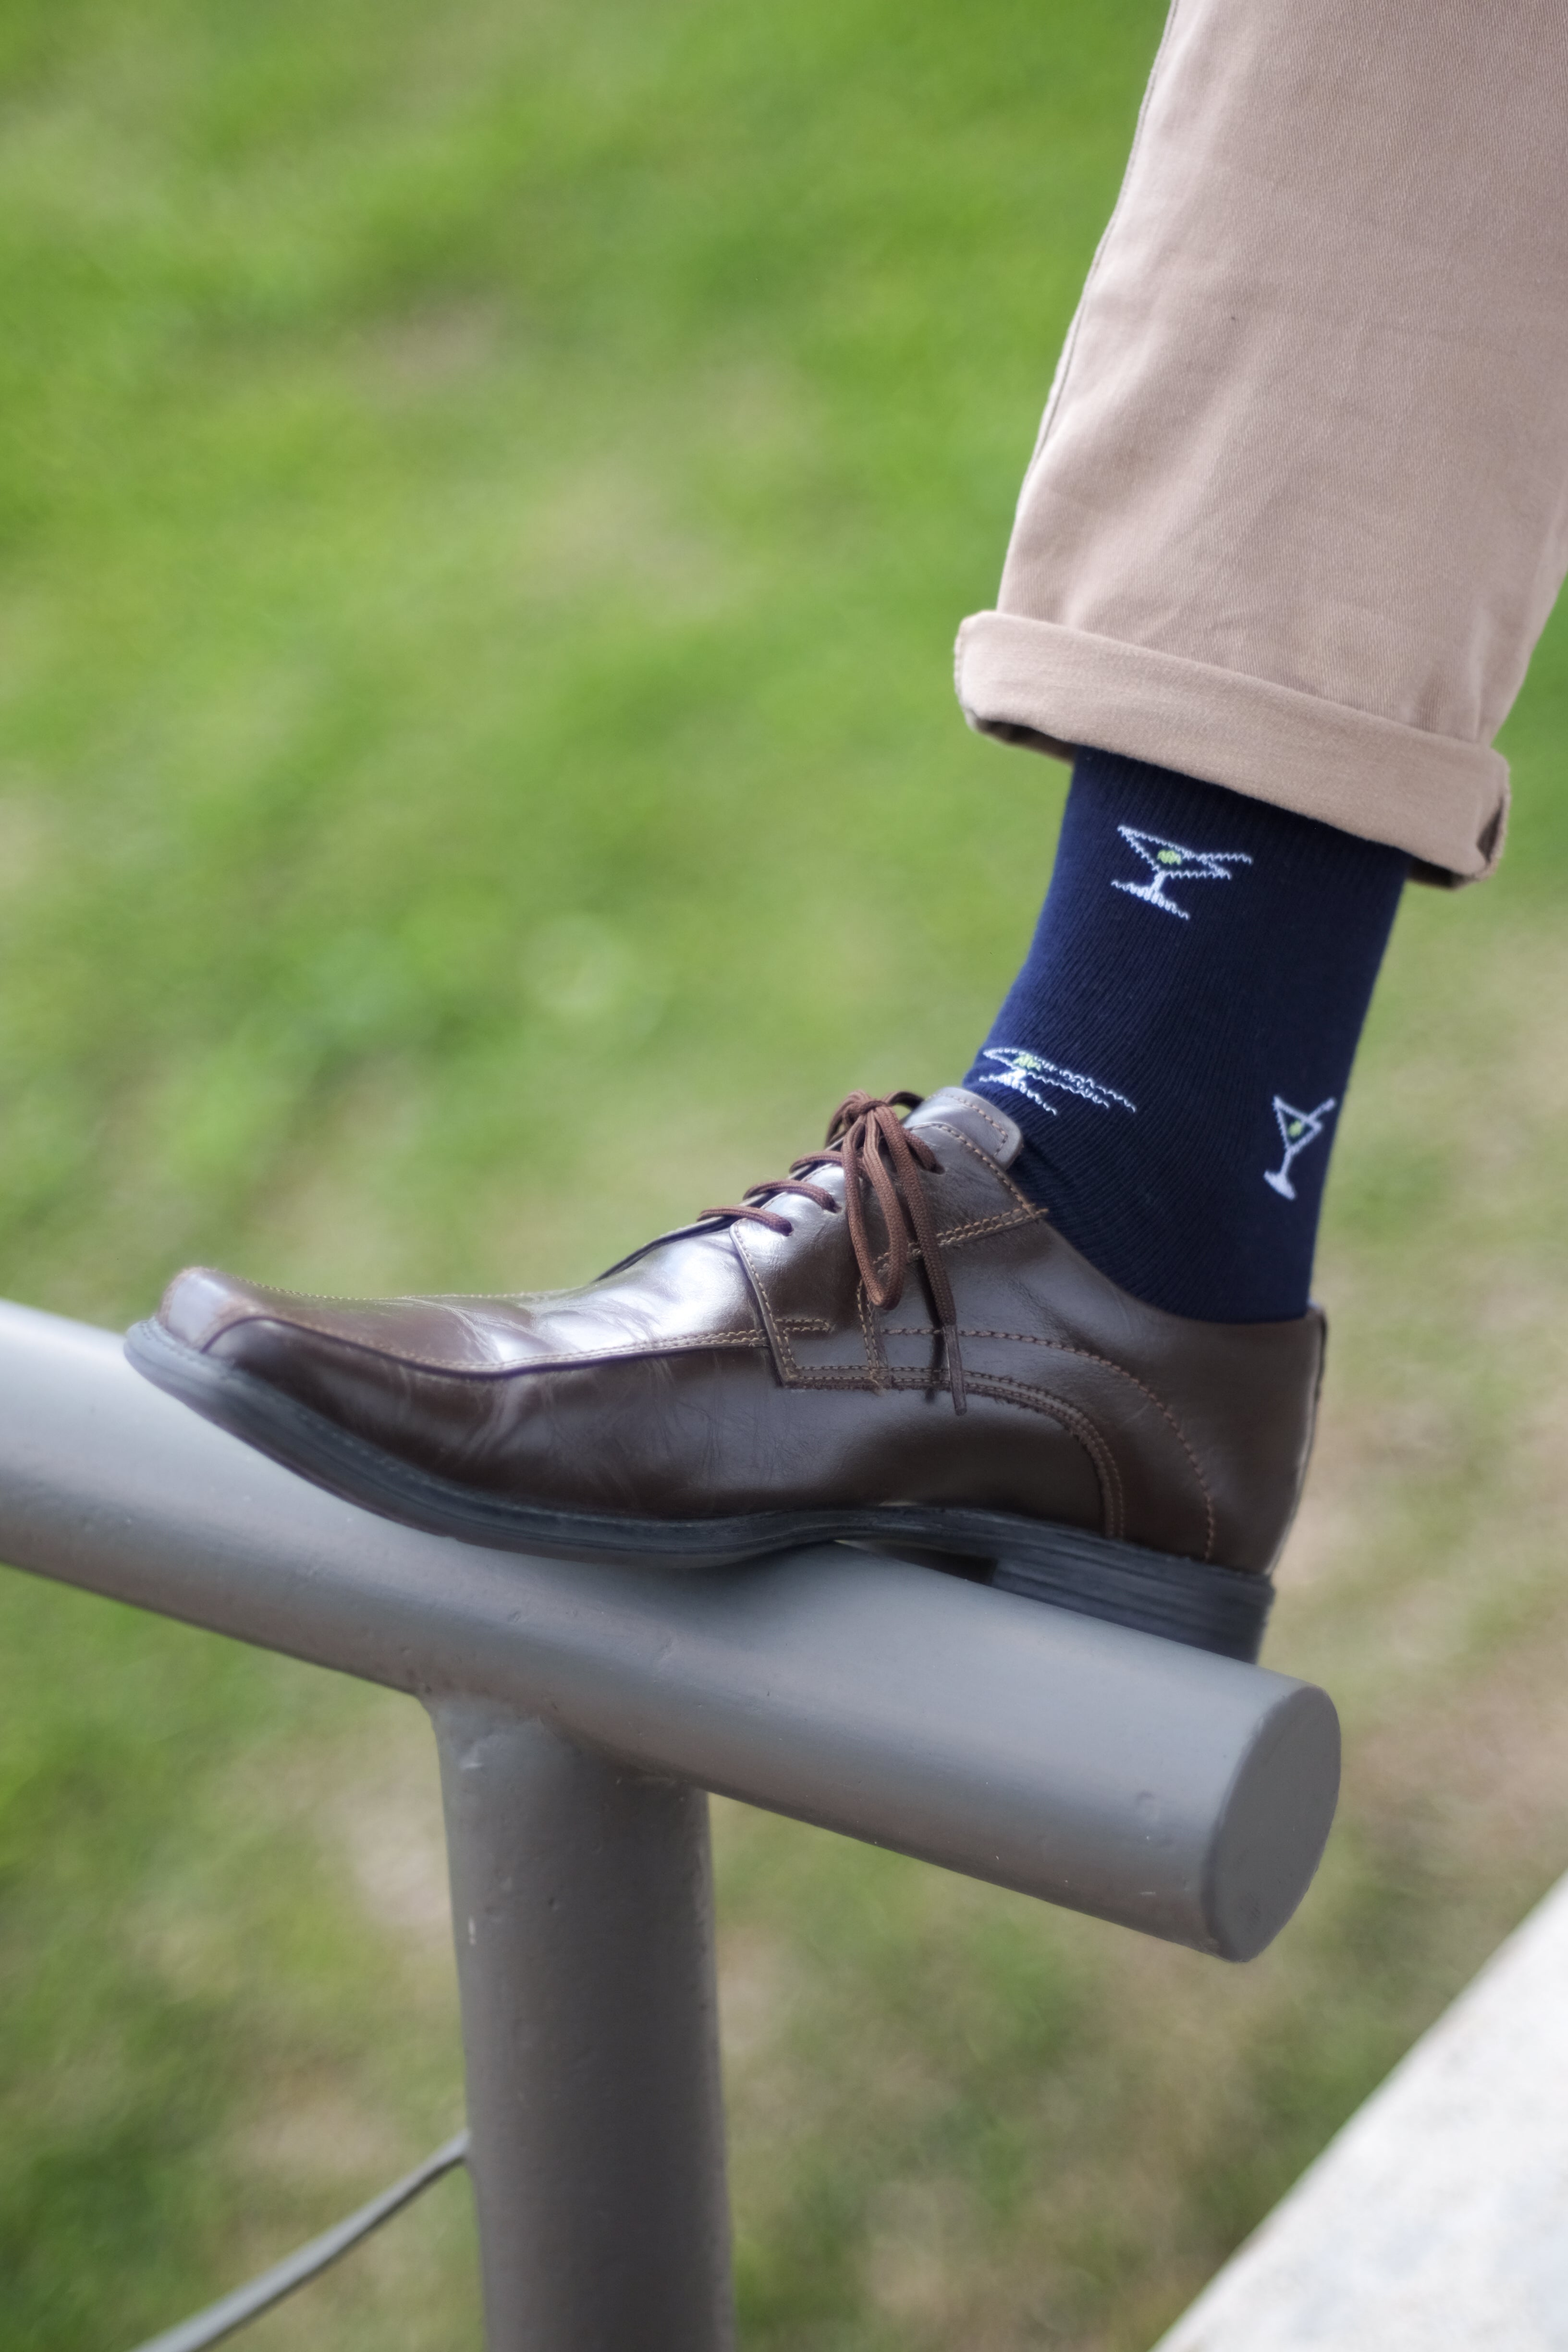 navy over the calf dress socks with cocktail pattern, brown shoes, and beige pants